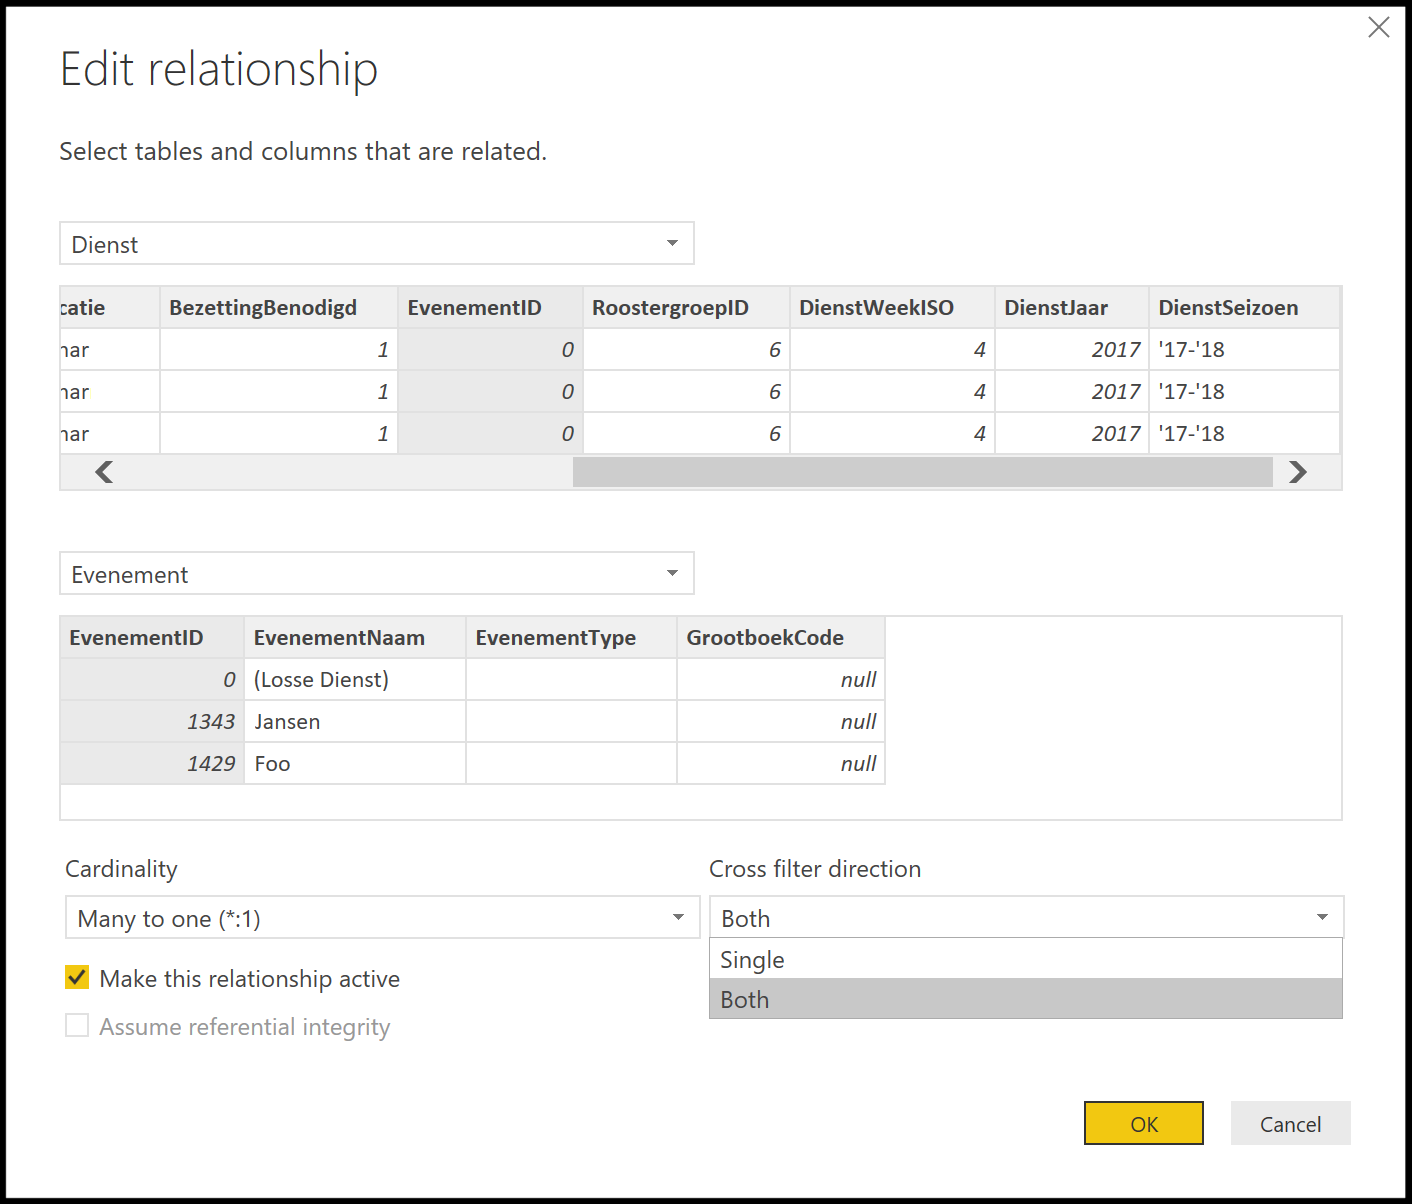 powerbi-crossfilter-direction-4-b5d1187c02133a7fc046acf97e557ab7.png